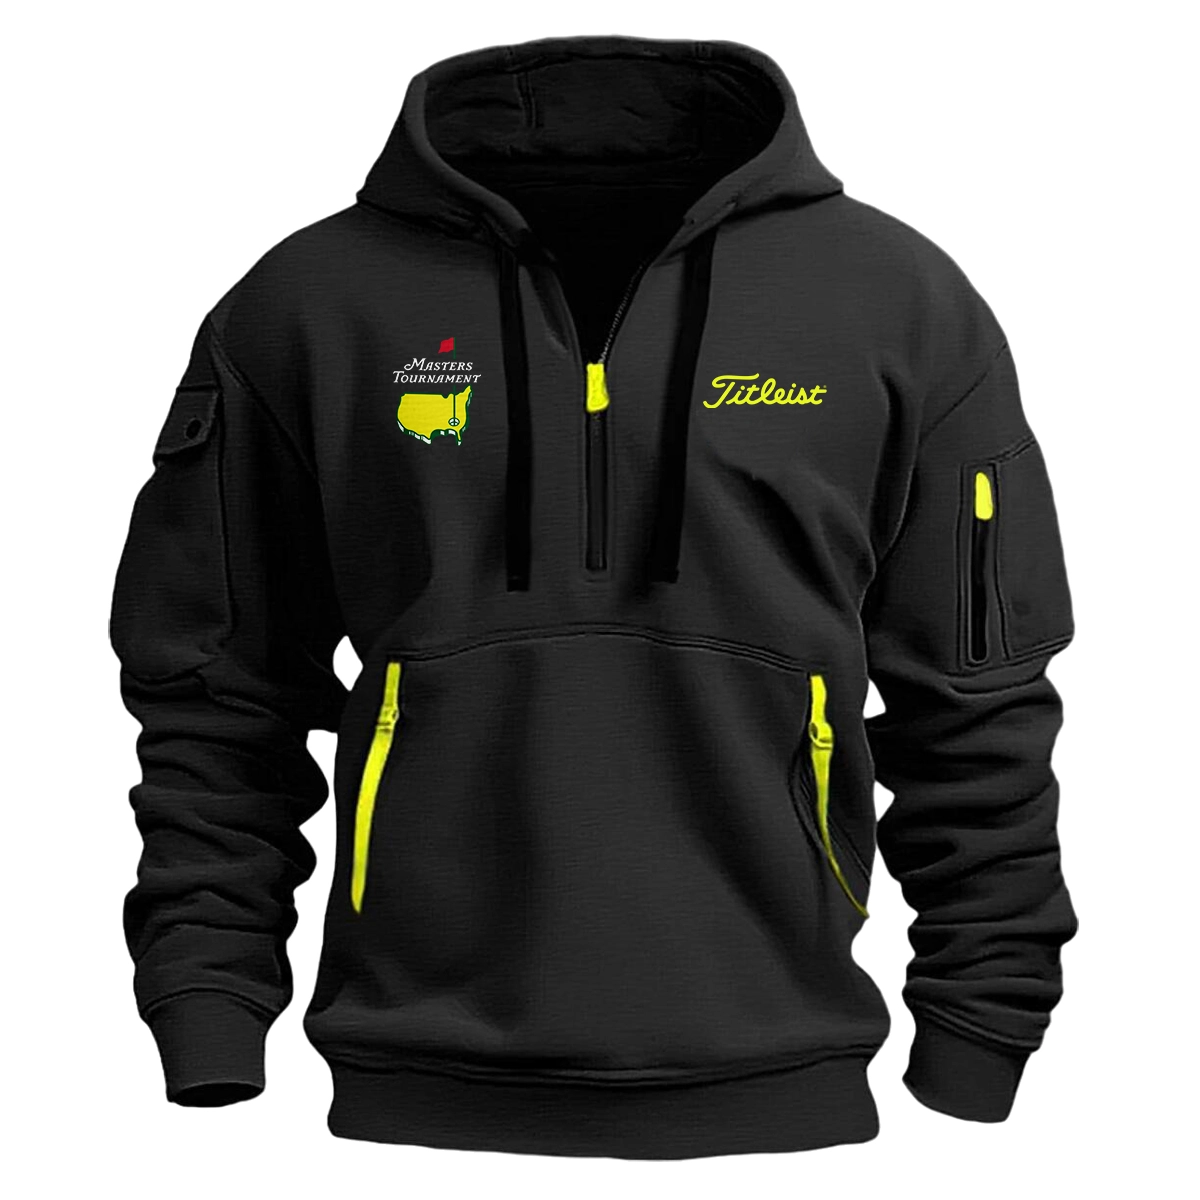 Black Color Titleist Fashion Hoodie Half Zipper Masters Tournament Gift For Fans